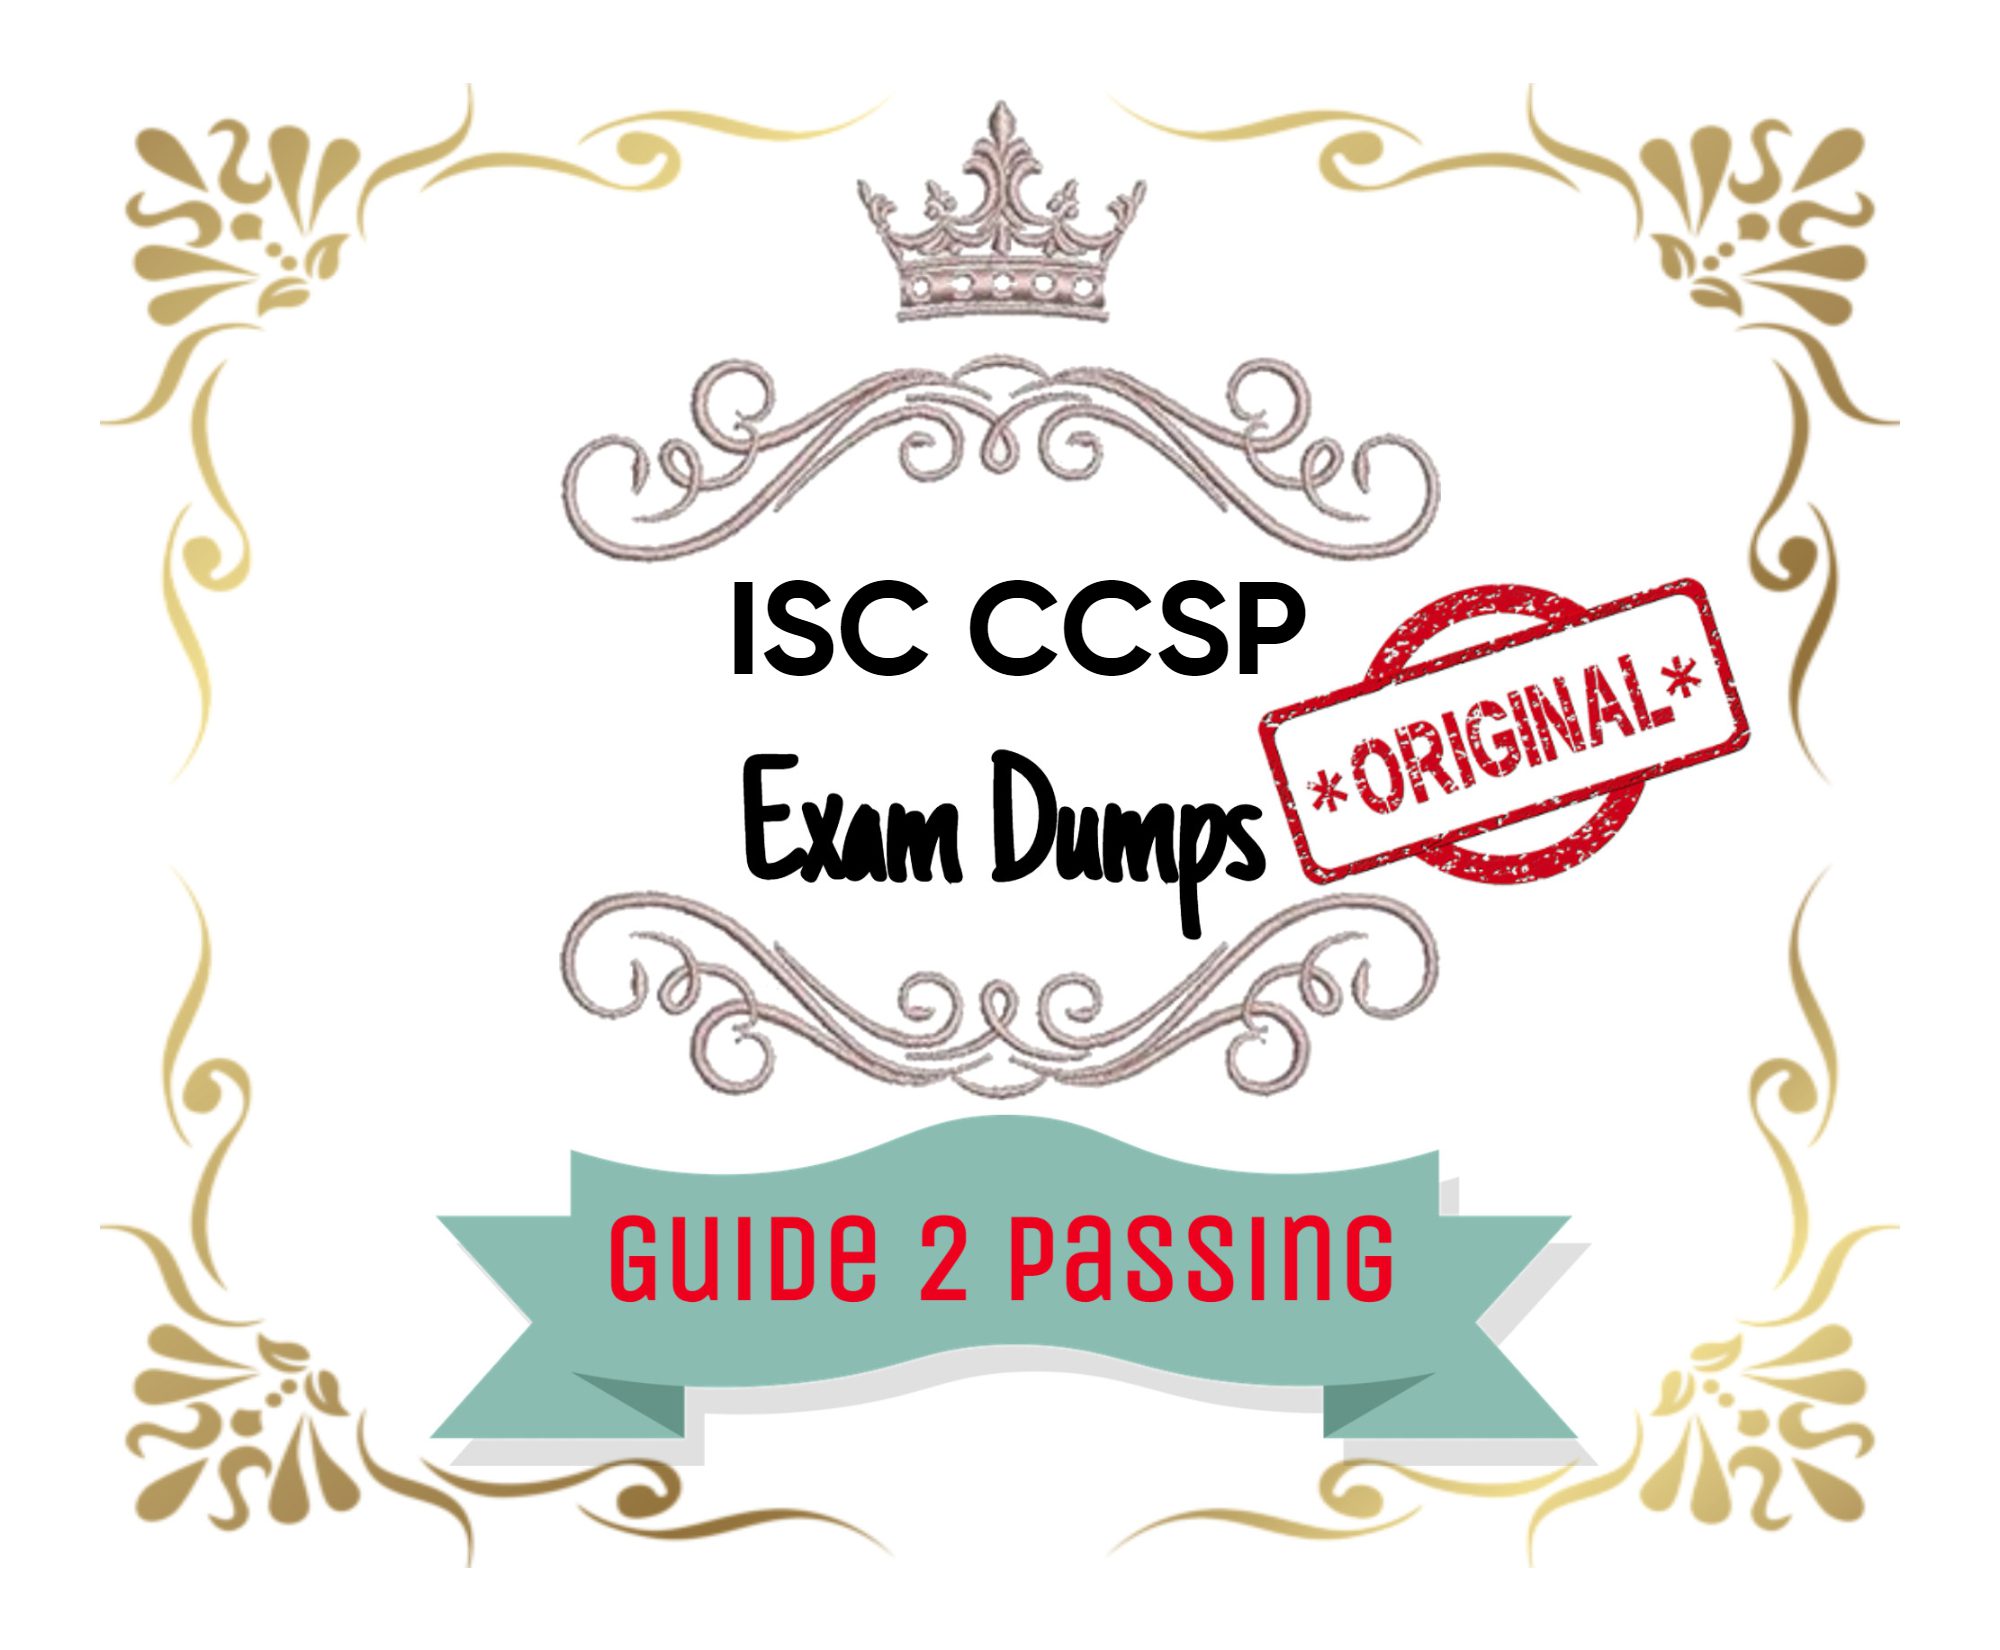 Pass Your ISC CCSP Exam Dumps From Guide 2 Passing